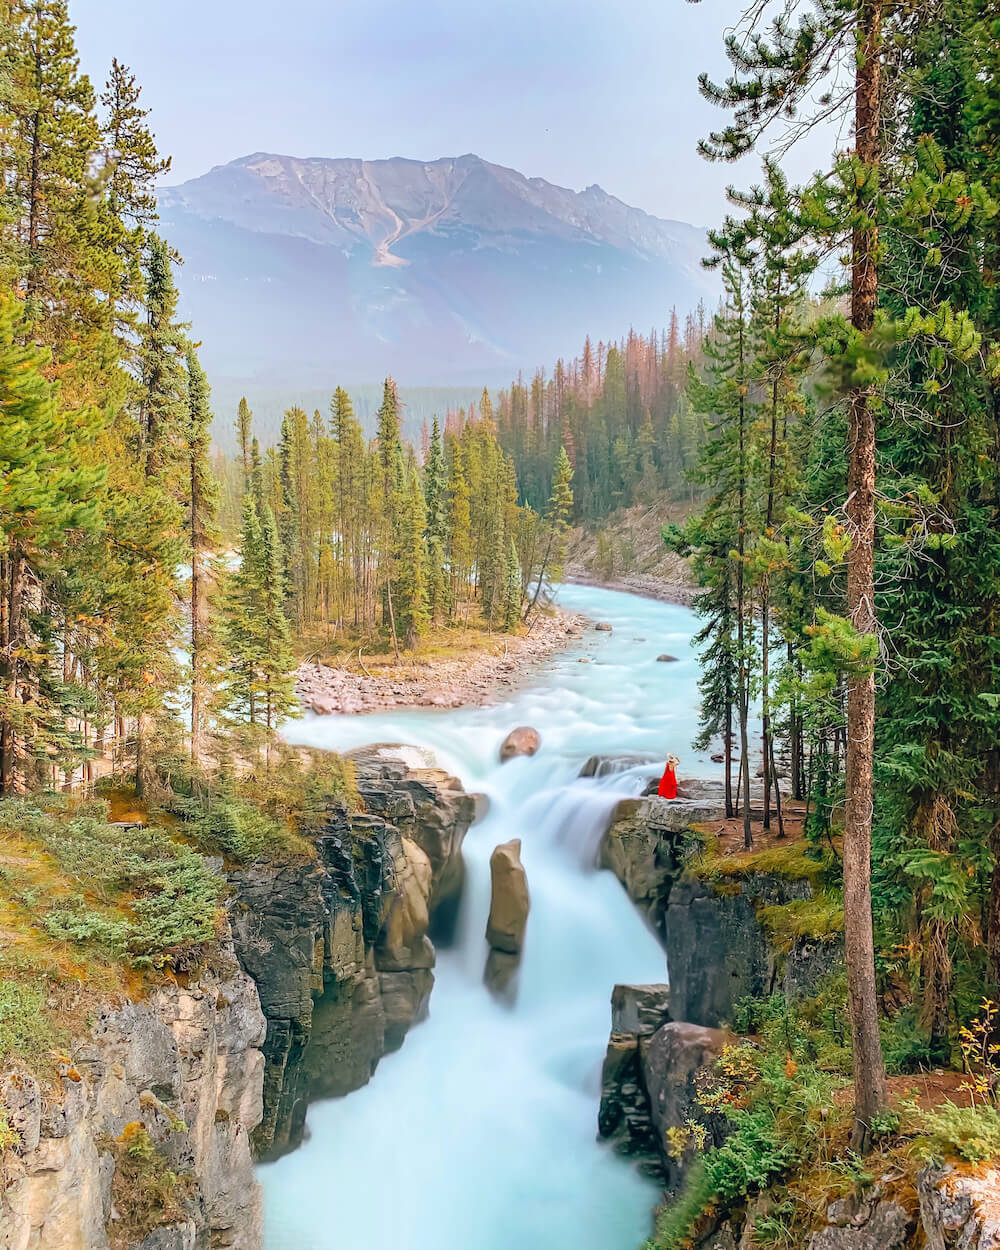 Planning a trip to Jasper National Park soon? Here's a local's guide to some of the best things to do in Jasper. From hikes and trails to adventure sports, family friendly excursions, dining experiences and more. You won't want to miss this guide of the best things to do and places to see in Jasper. Pictured here: Sunwapta Falls